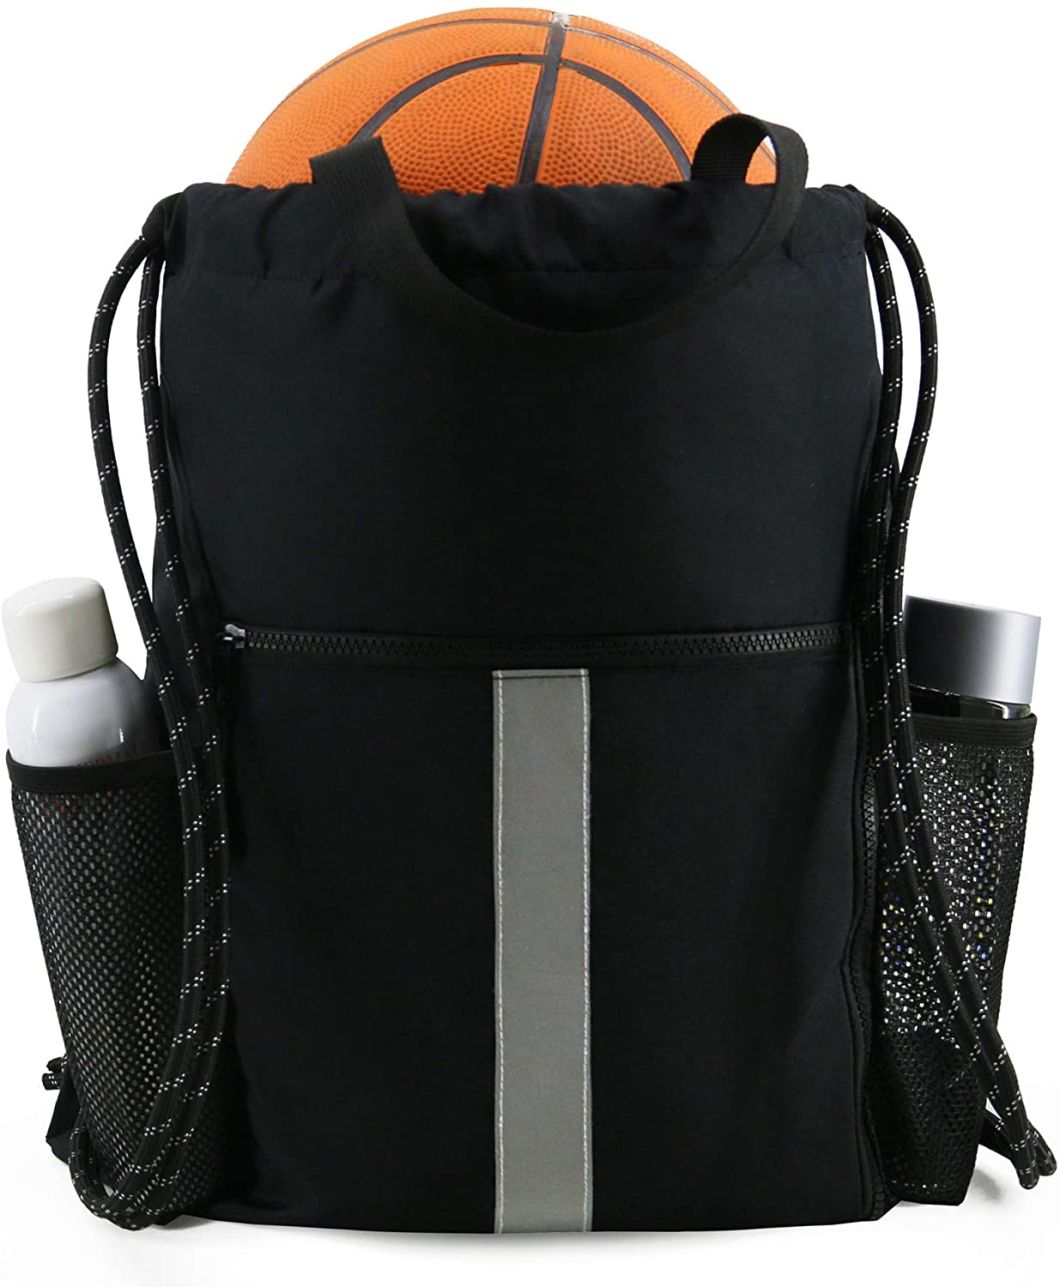 Sports Gym Drawstring Backpack Bag with Shoe Compartment